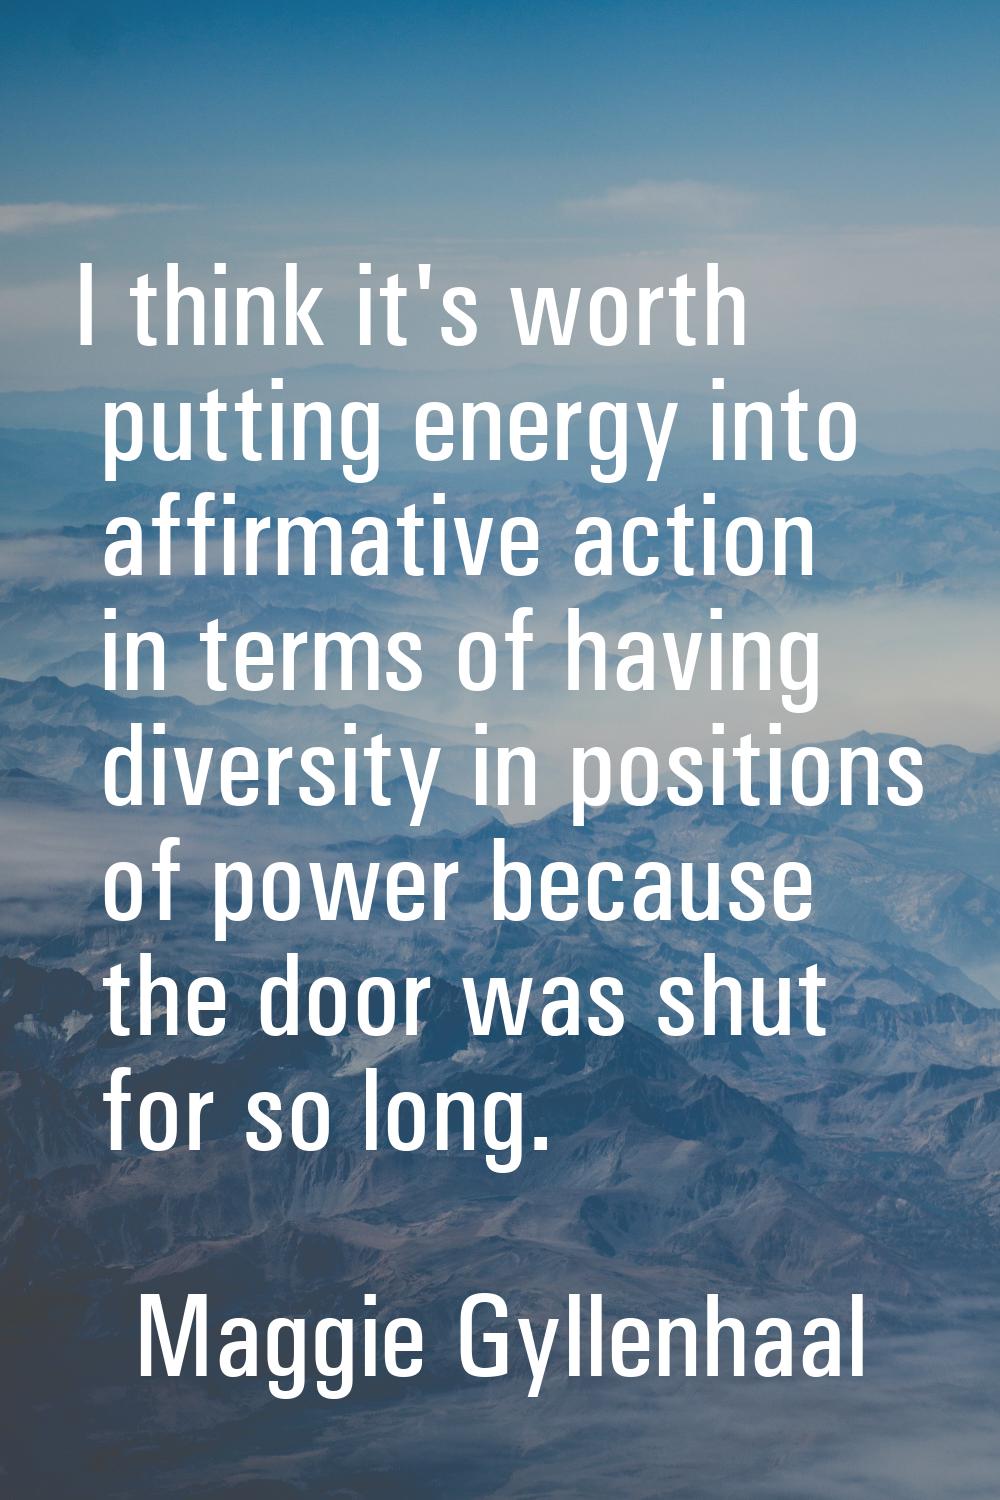 I think it's worth putting energy into affirmative action in terms of having diversity in positions